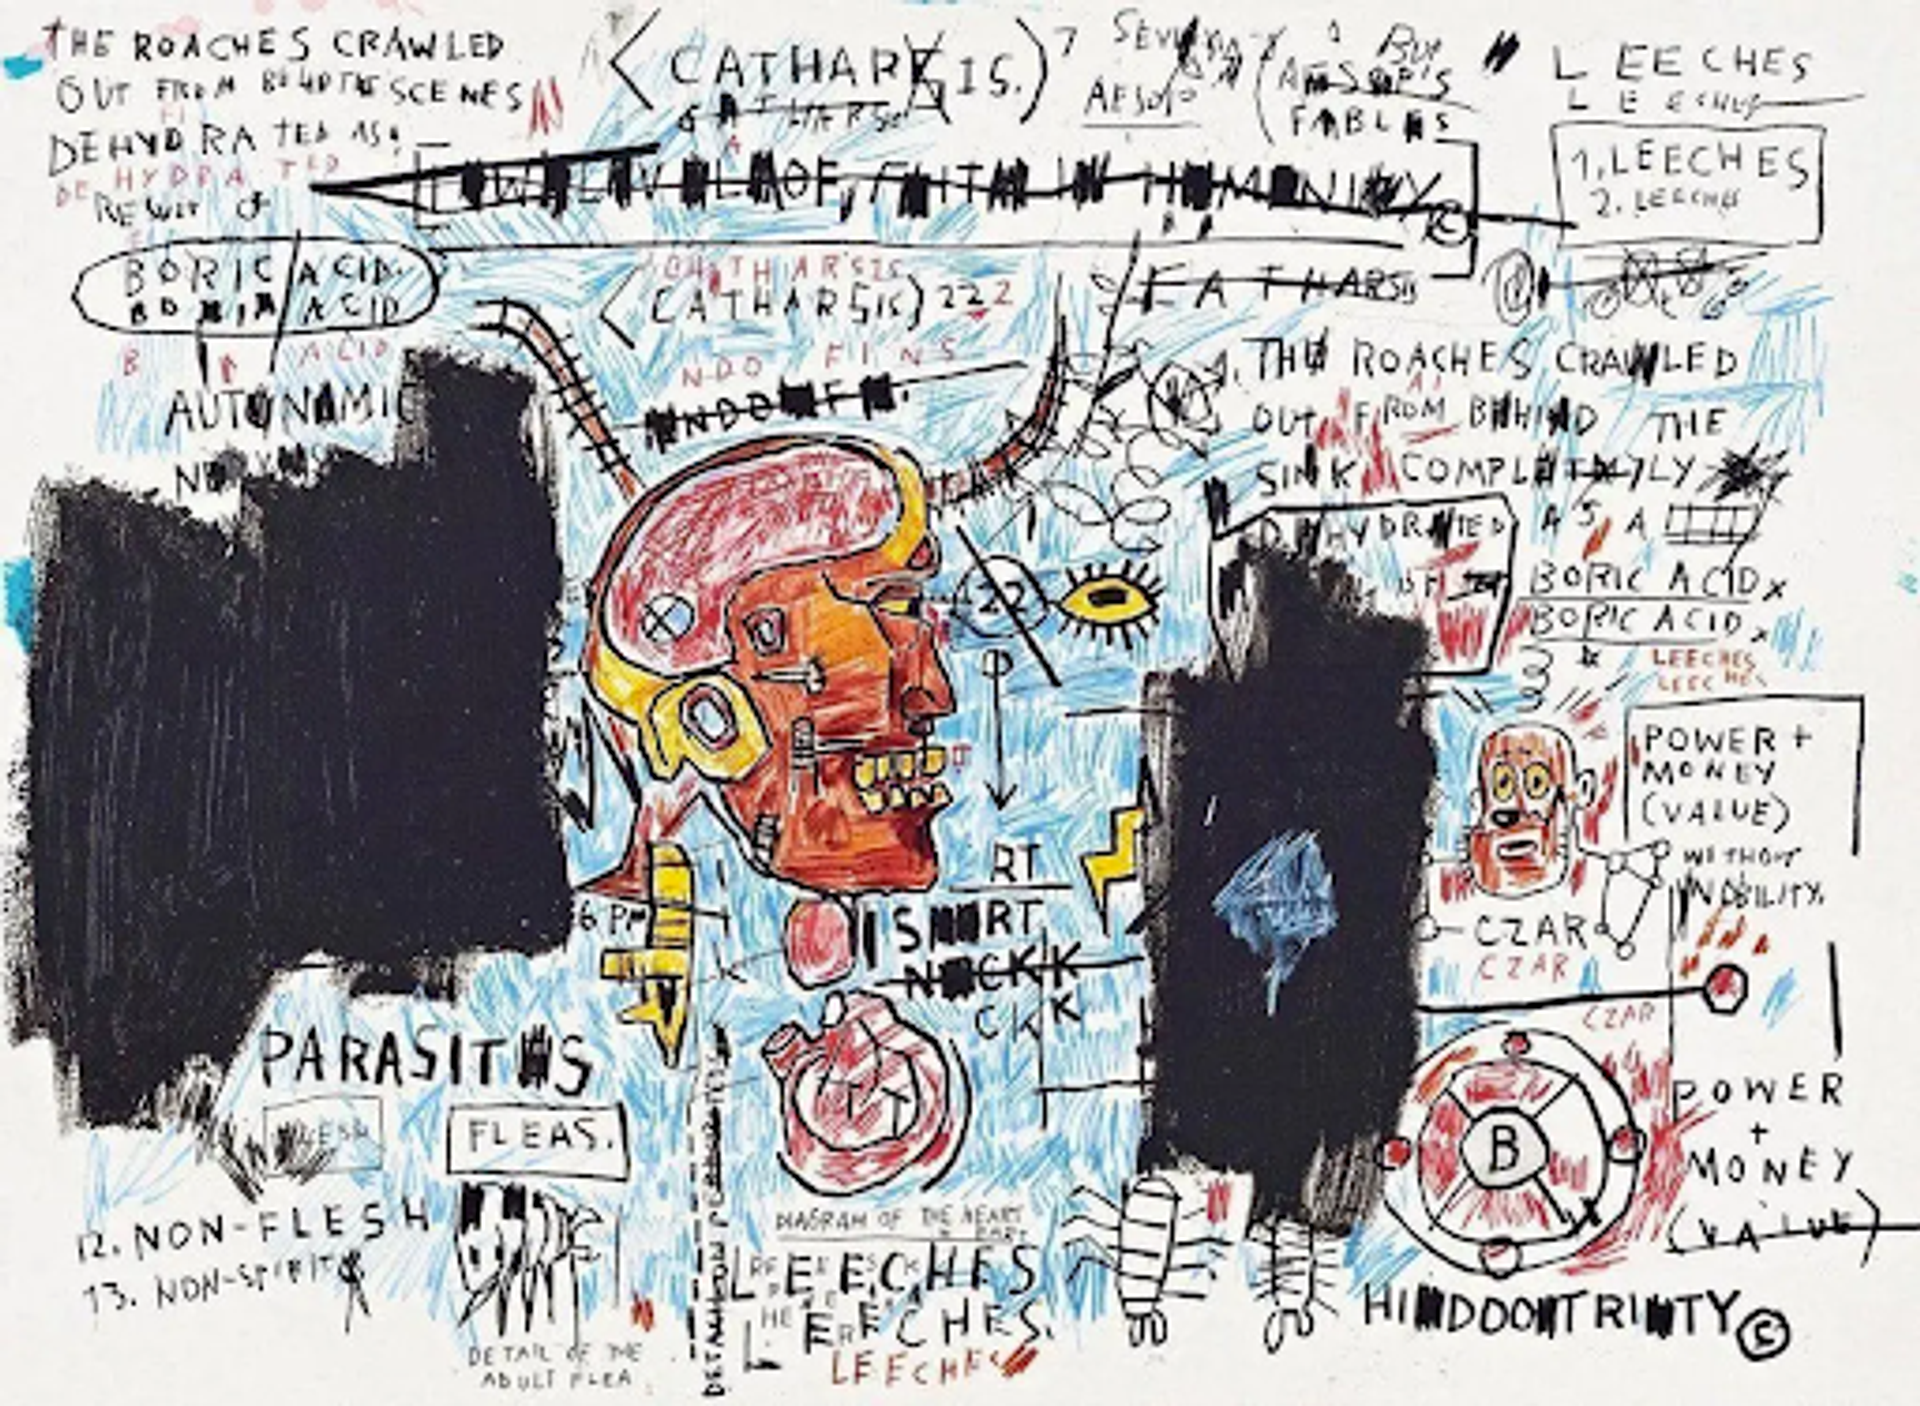 Jean-Michel Basquiat’s Leeches. A Neo Expressionist screenprint of a red skull in the middle of a white background with blue in the centre along with a variety of texts and symbols. 